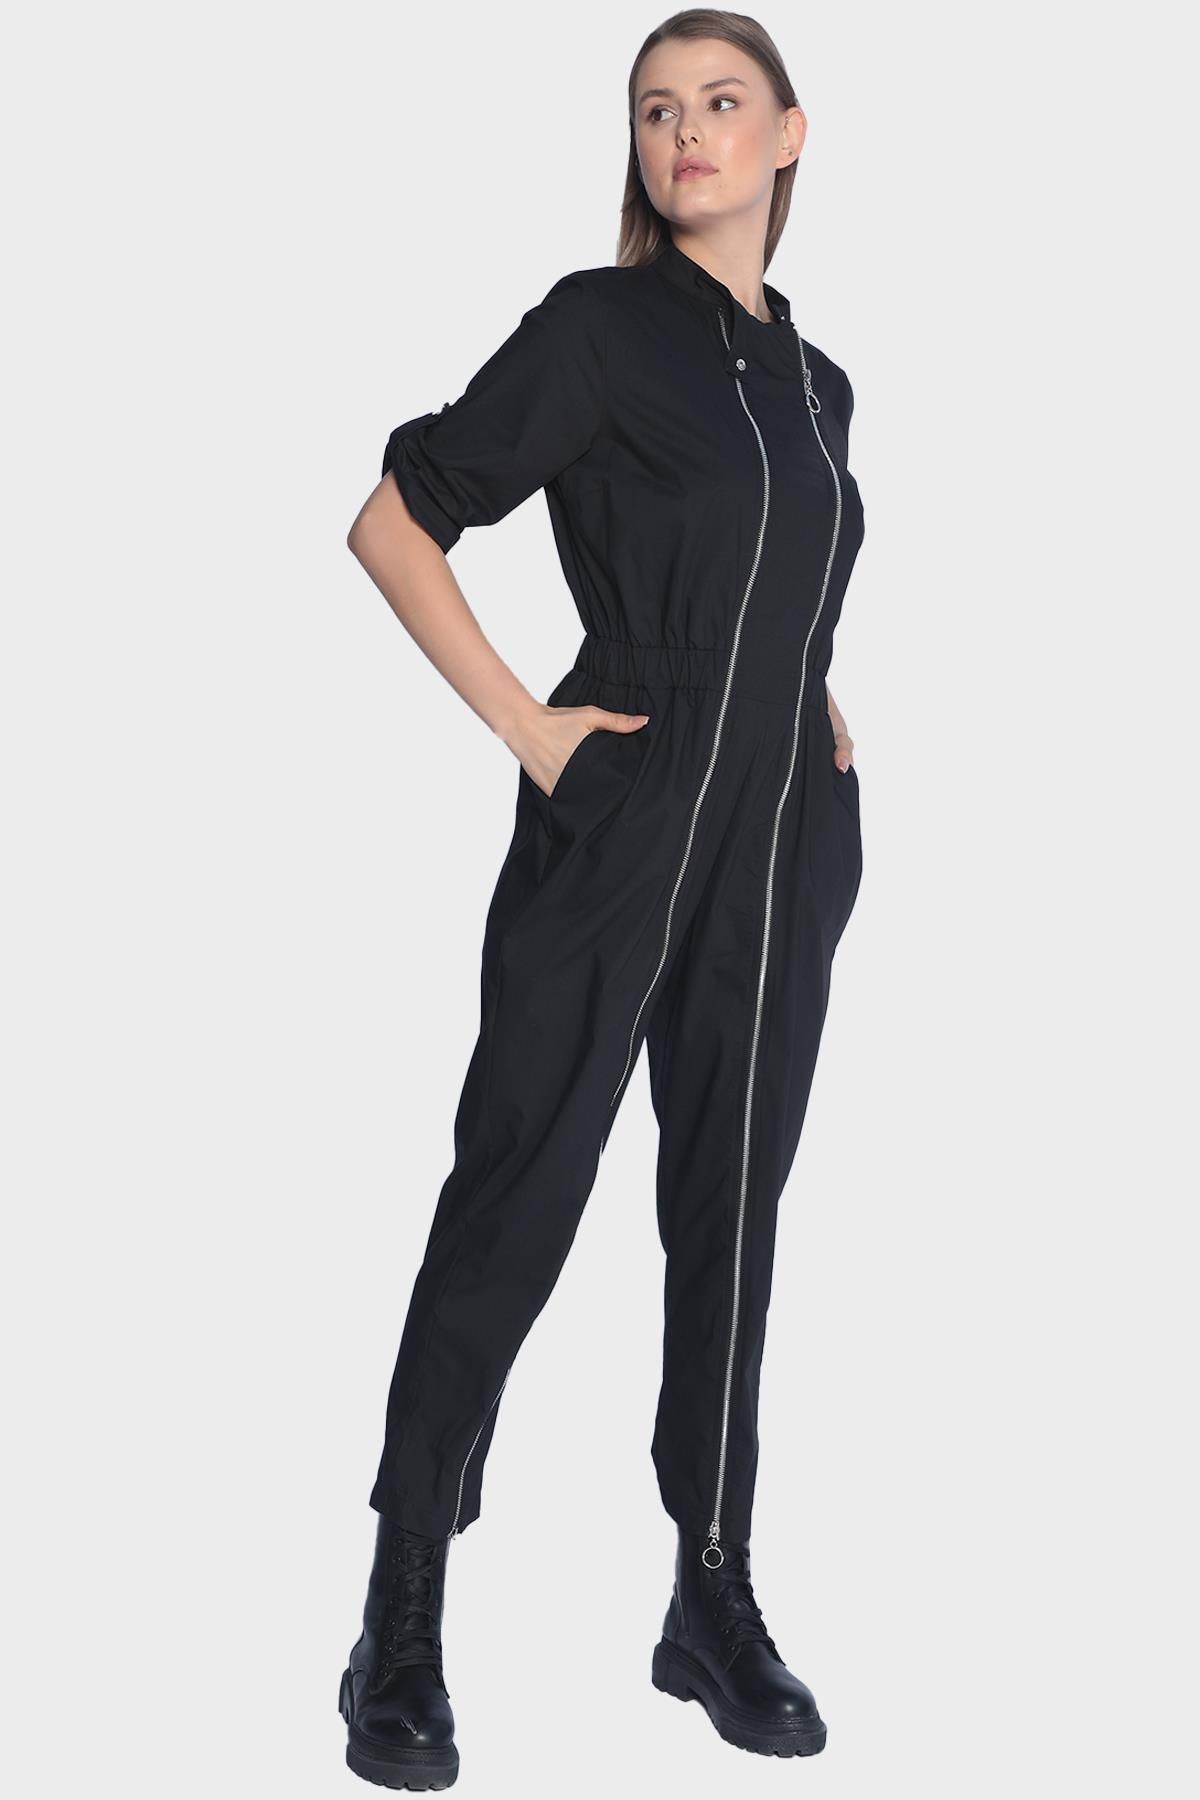 Womens sports style jumpsuit with round neckline and double zipper